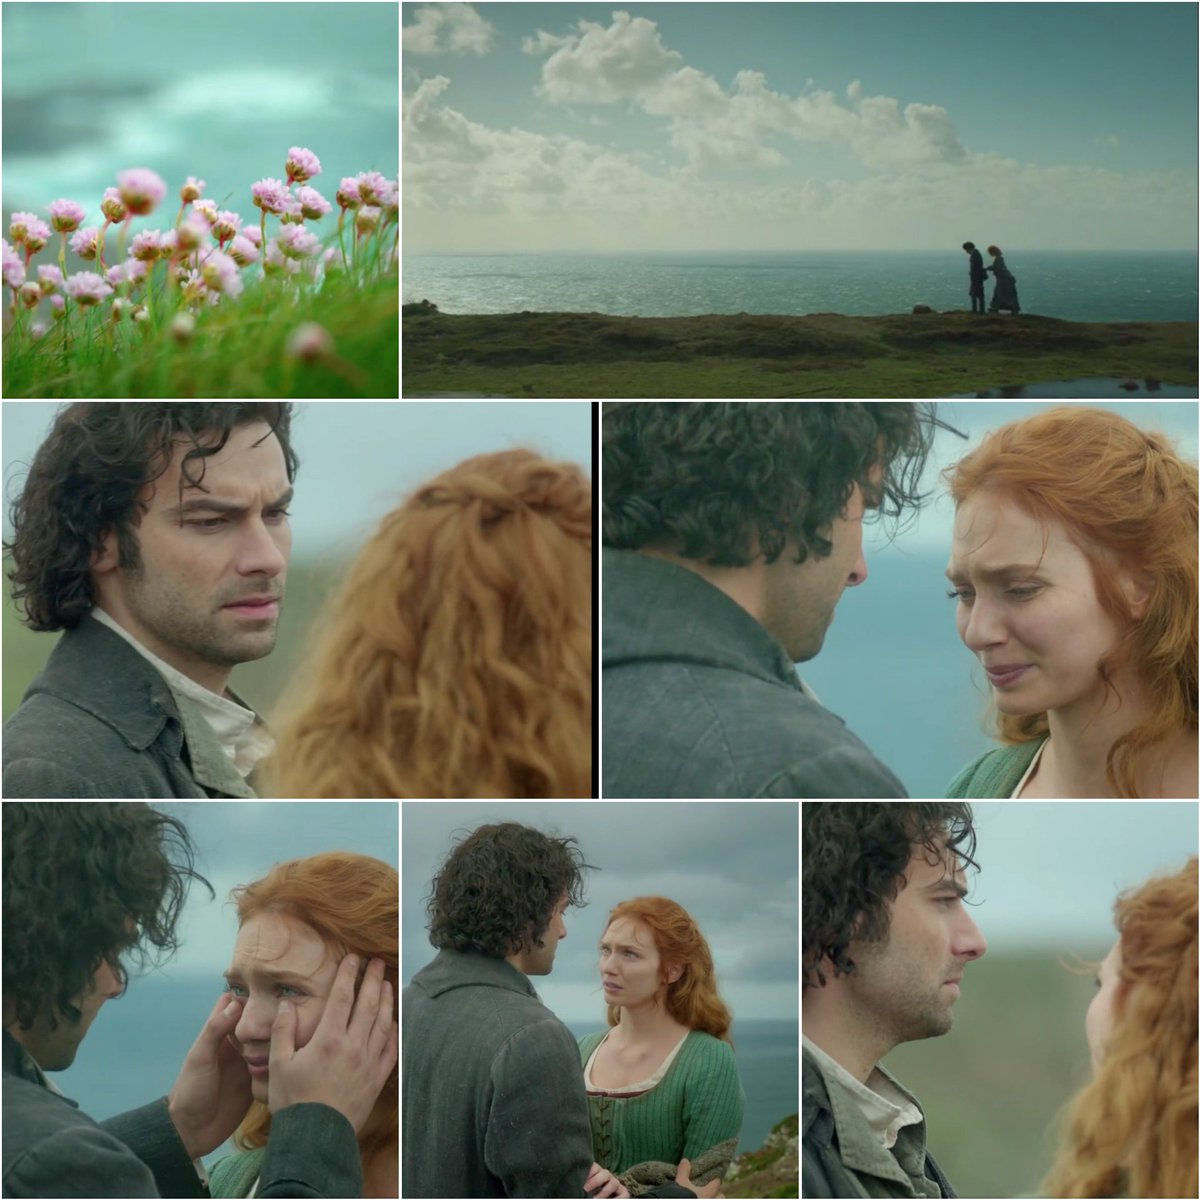 Now is the time to #bringbackPoldark #Poldark6 #Poldark Come on, @mammothscreen @masterpiecepbs @BBCOne Complete the remaining story. #AidanCrew #DebbieHorsfield #WinstonGraham Credit pic owner